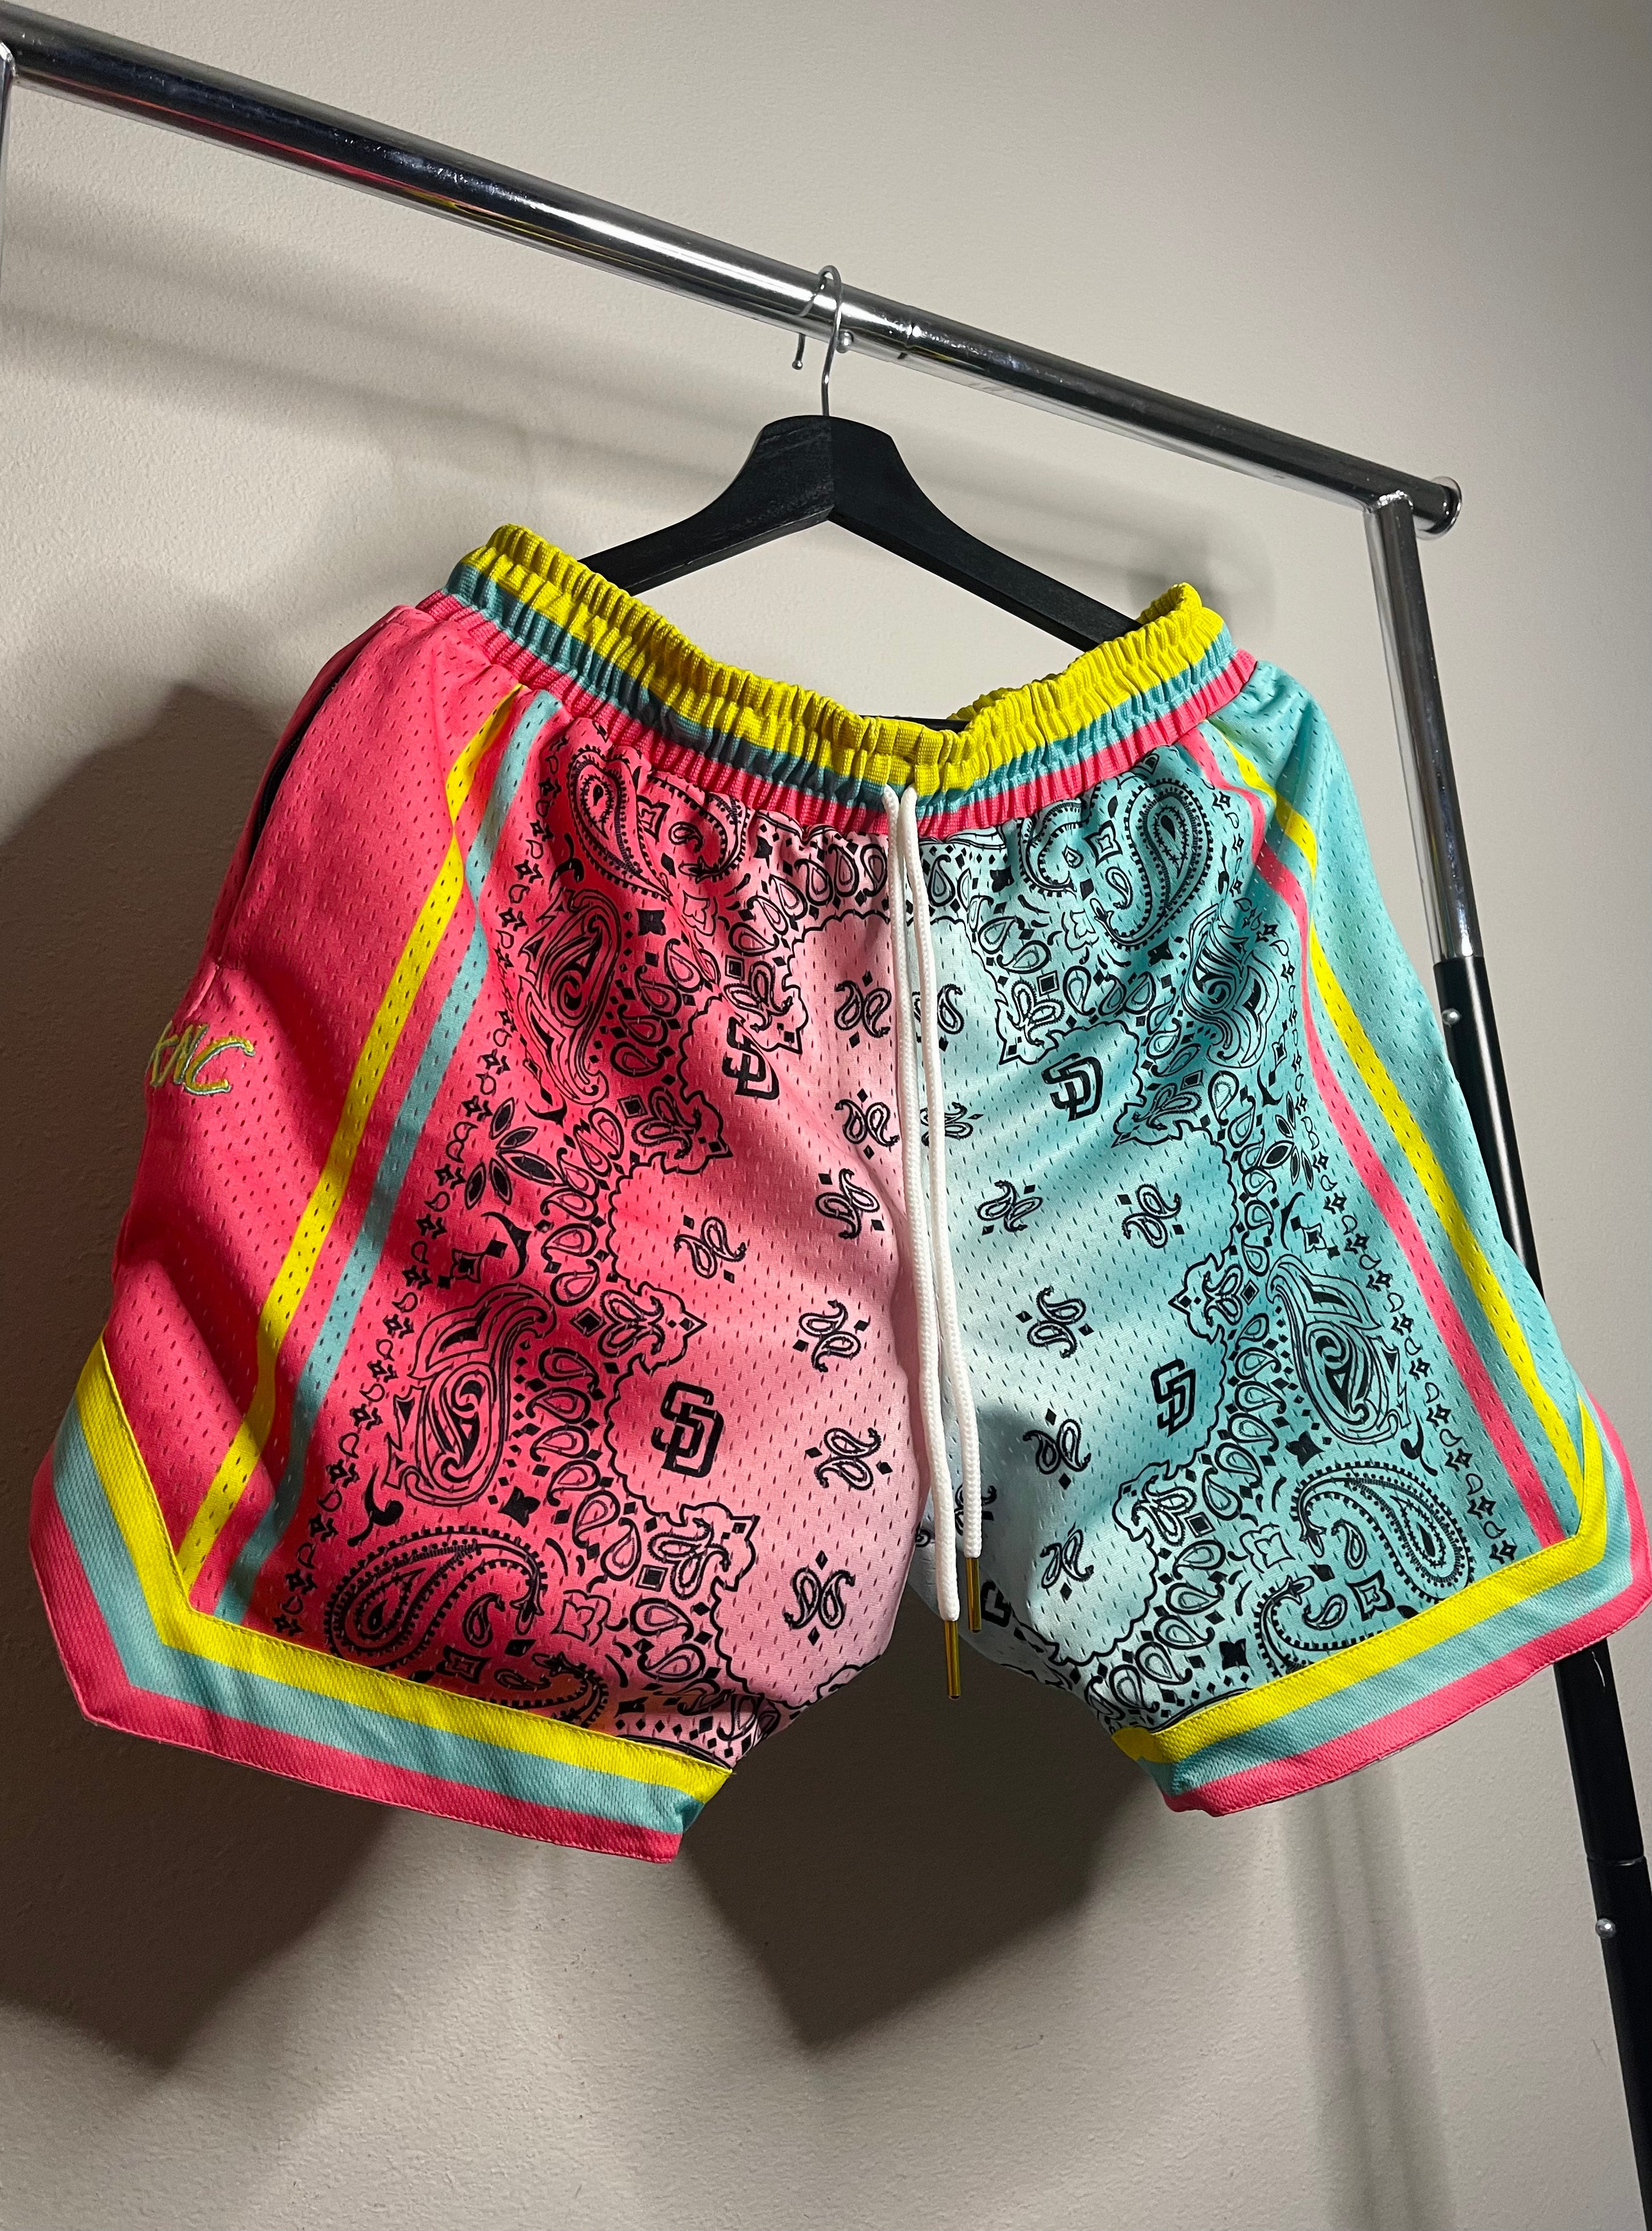 FOR THE CITY (City Connect) Mesh Shorts – Good Kids Nasty City